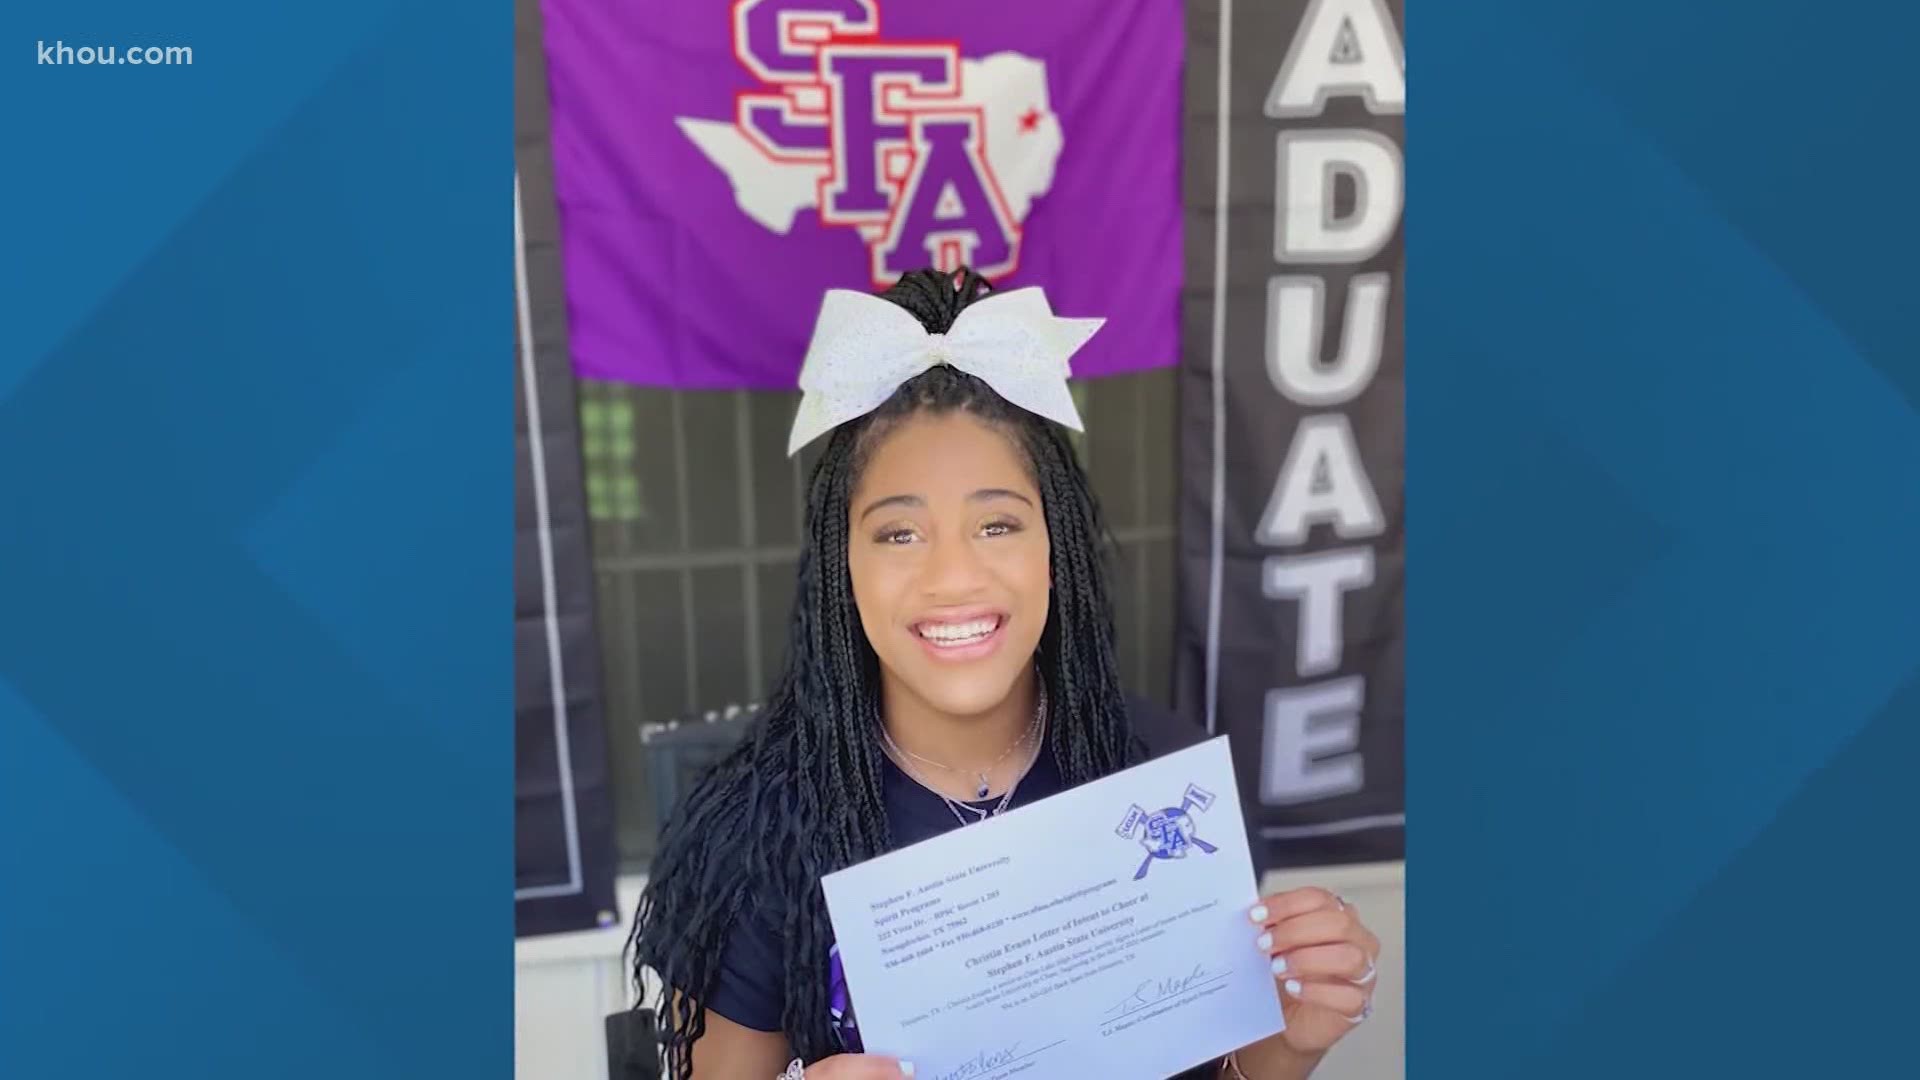 SFA leaders said Wednesday a false police report that sent officers into a student’s dorm as she slept was not racially motivated but could lead to criminal charges.